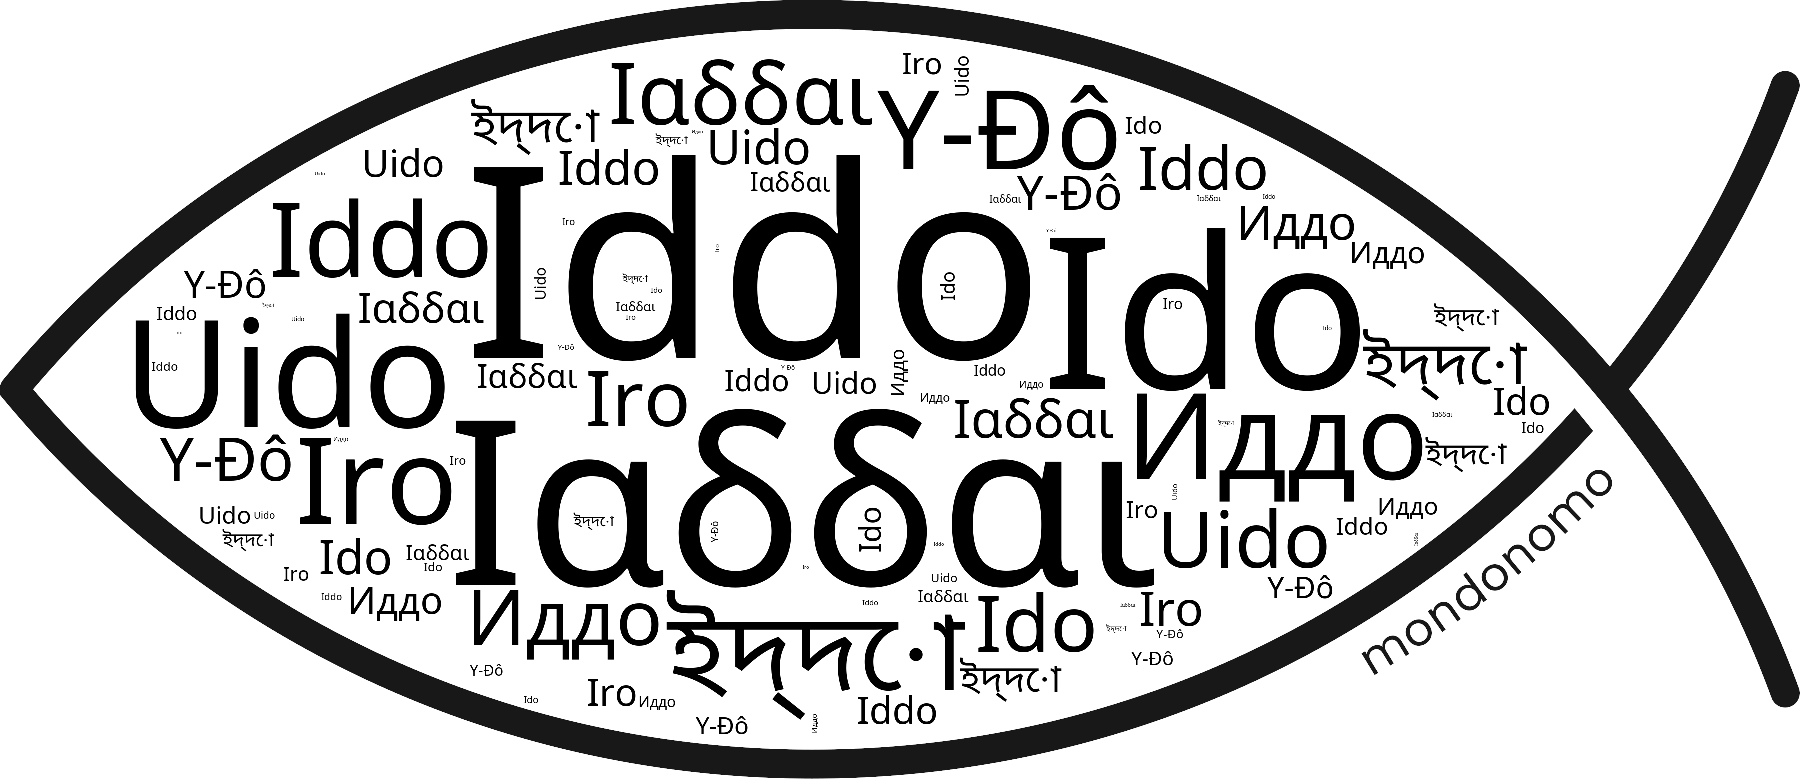 Name Iddo in the world's Bibles